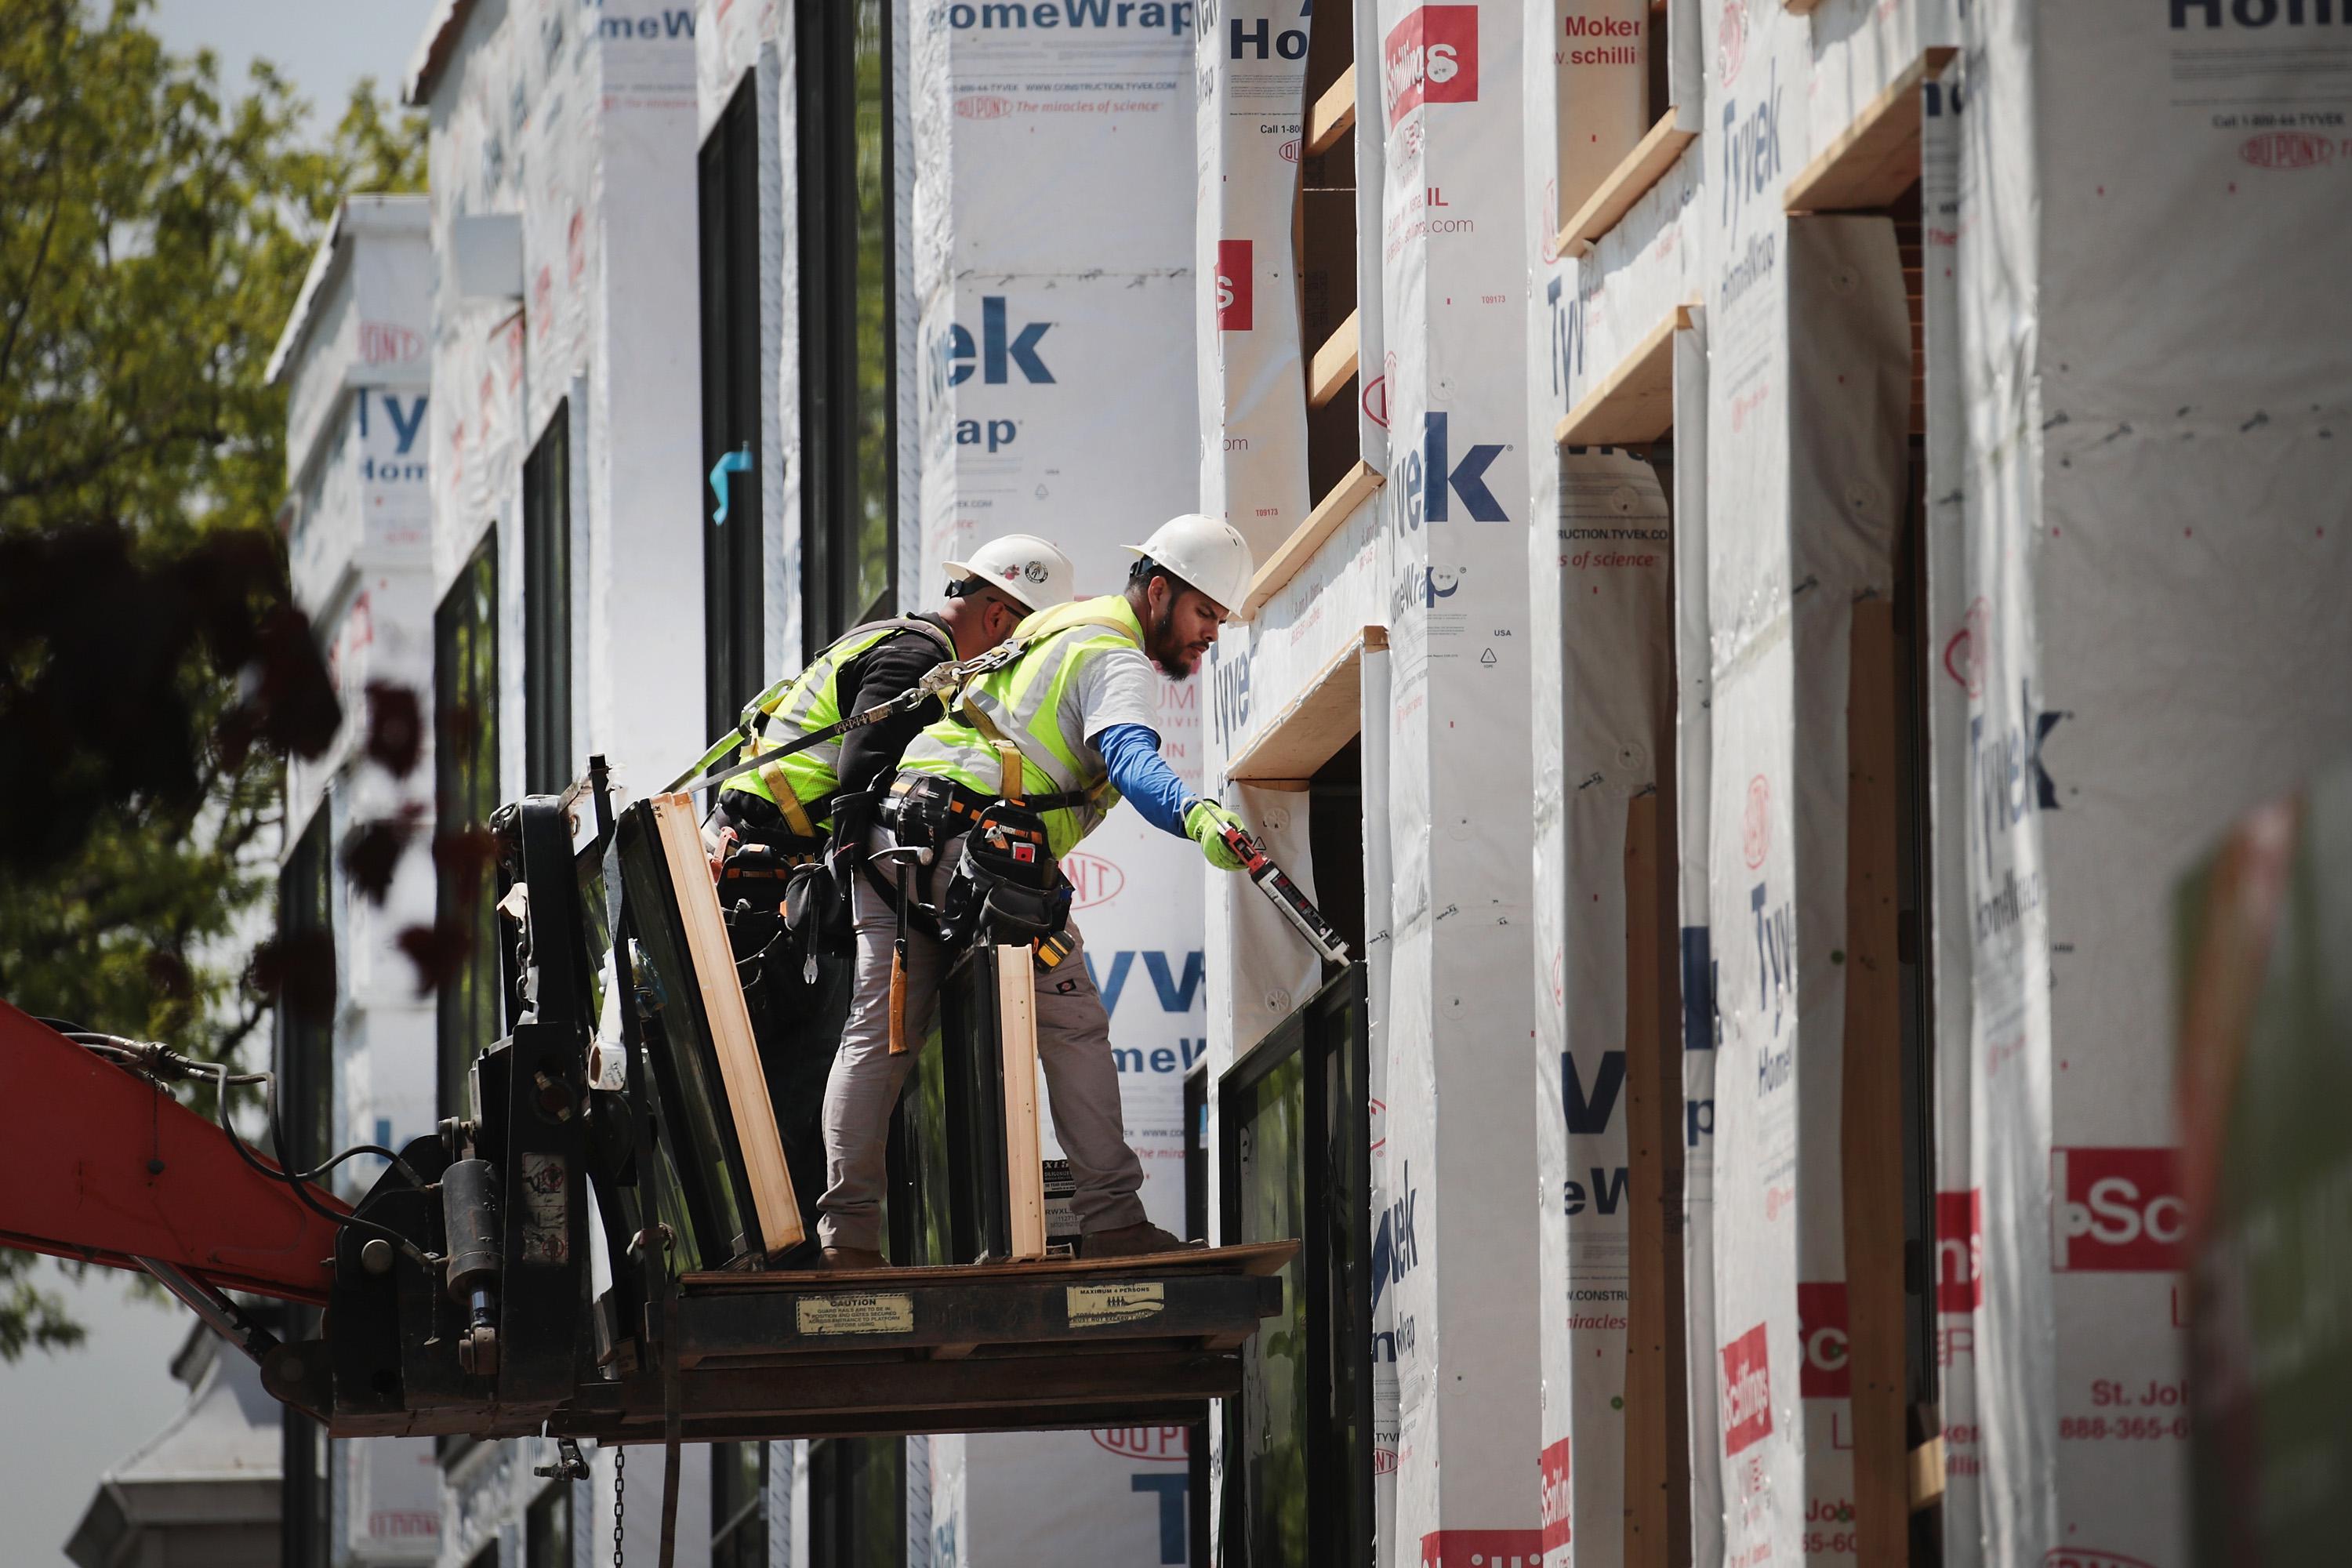 CHICAGO, IL - MAY 15:  Workers install windows in a townhome complex under construction on May 15, 2017 in Chicago, Illinois. The National Association of Home Builders said today that its housing-market index rose by two points in May, a signal of a strengthening housing market. New home construction statistics for April will be released by the United States Census Bureau on May 16.  (Photo by Scott Olson/Getty Images)